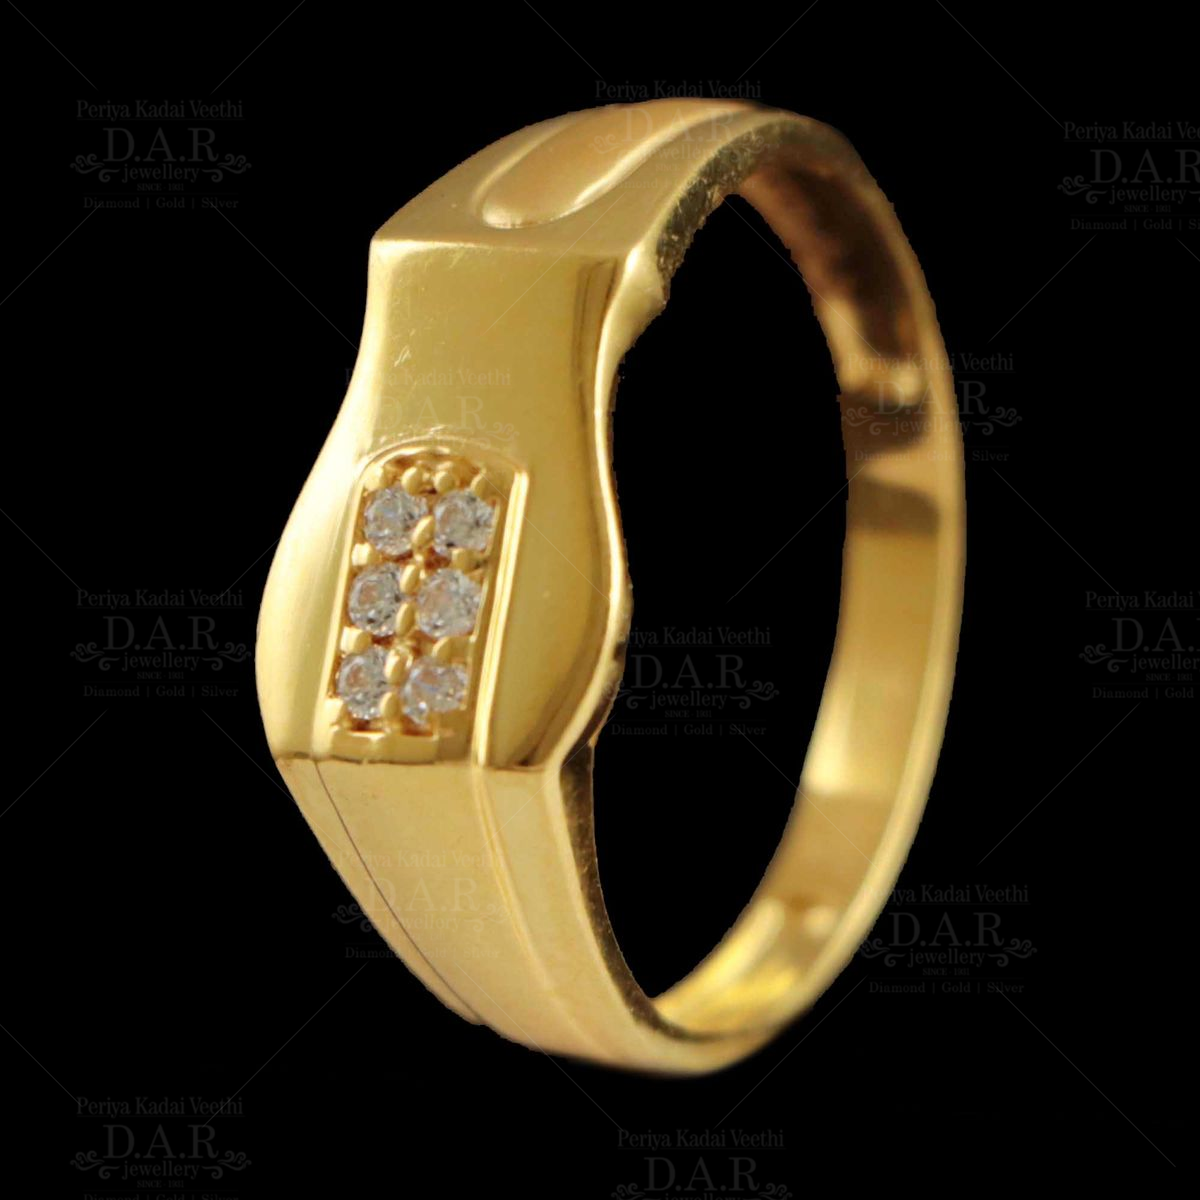 Ladies Ring - Design 2 | Ladies gold rings, Gold rings jewelry, Gold ring  indian